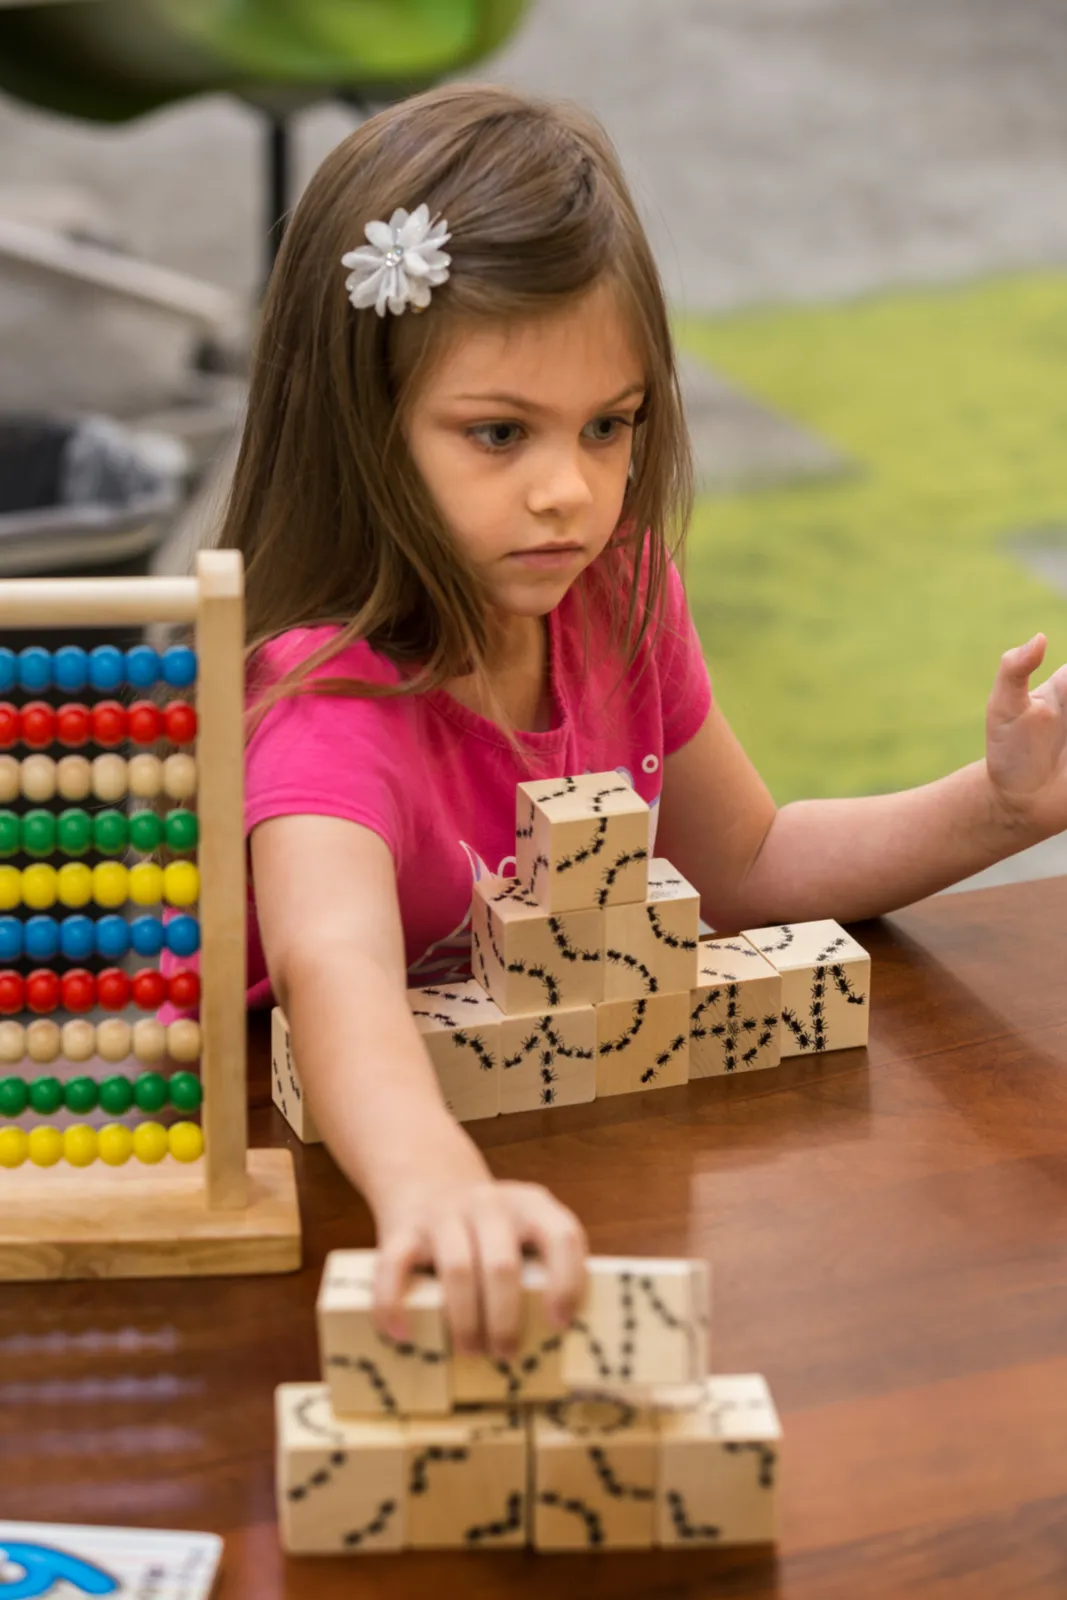 Girl building with blocks.